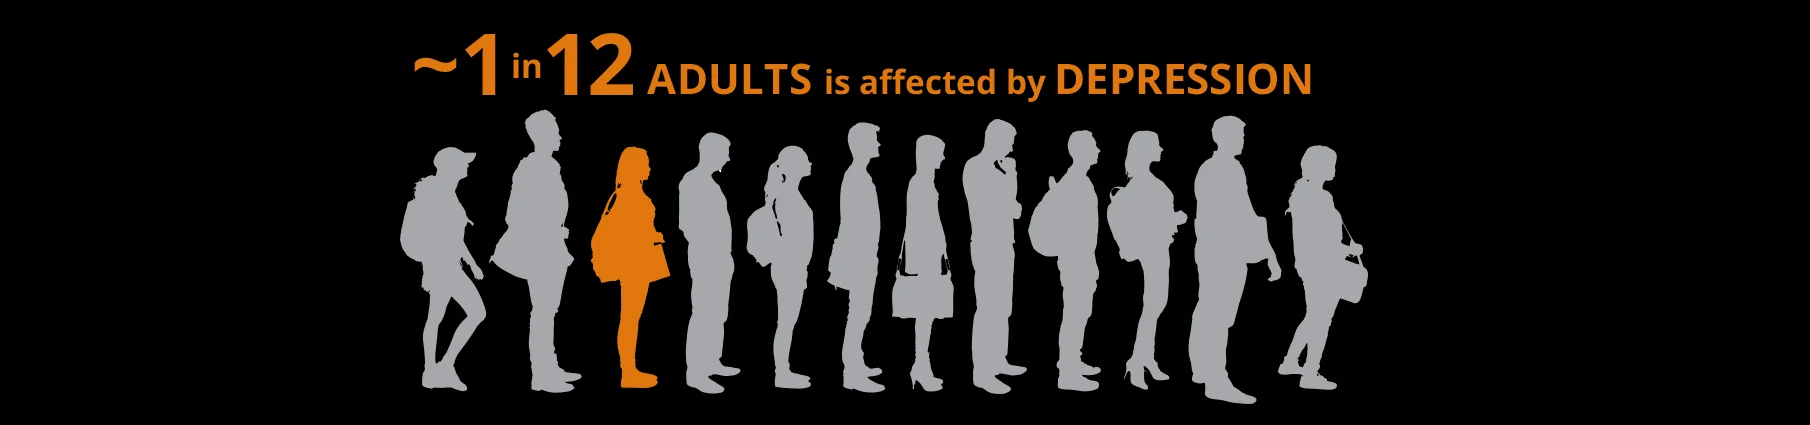 graphic of ~1 in 12 adults is affected by DEPRESSION